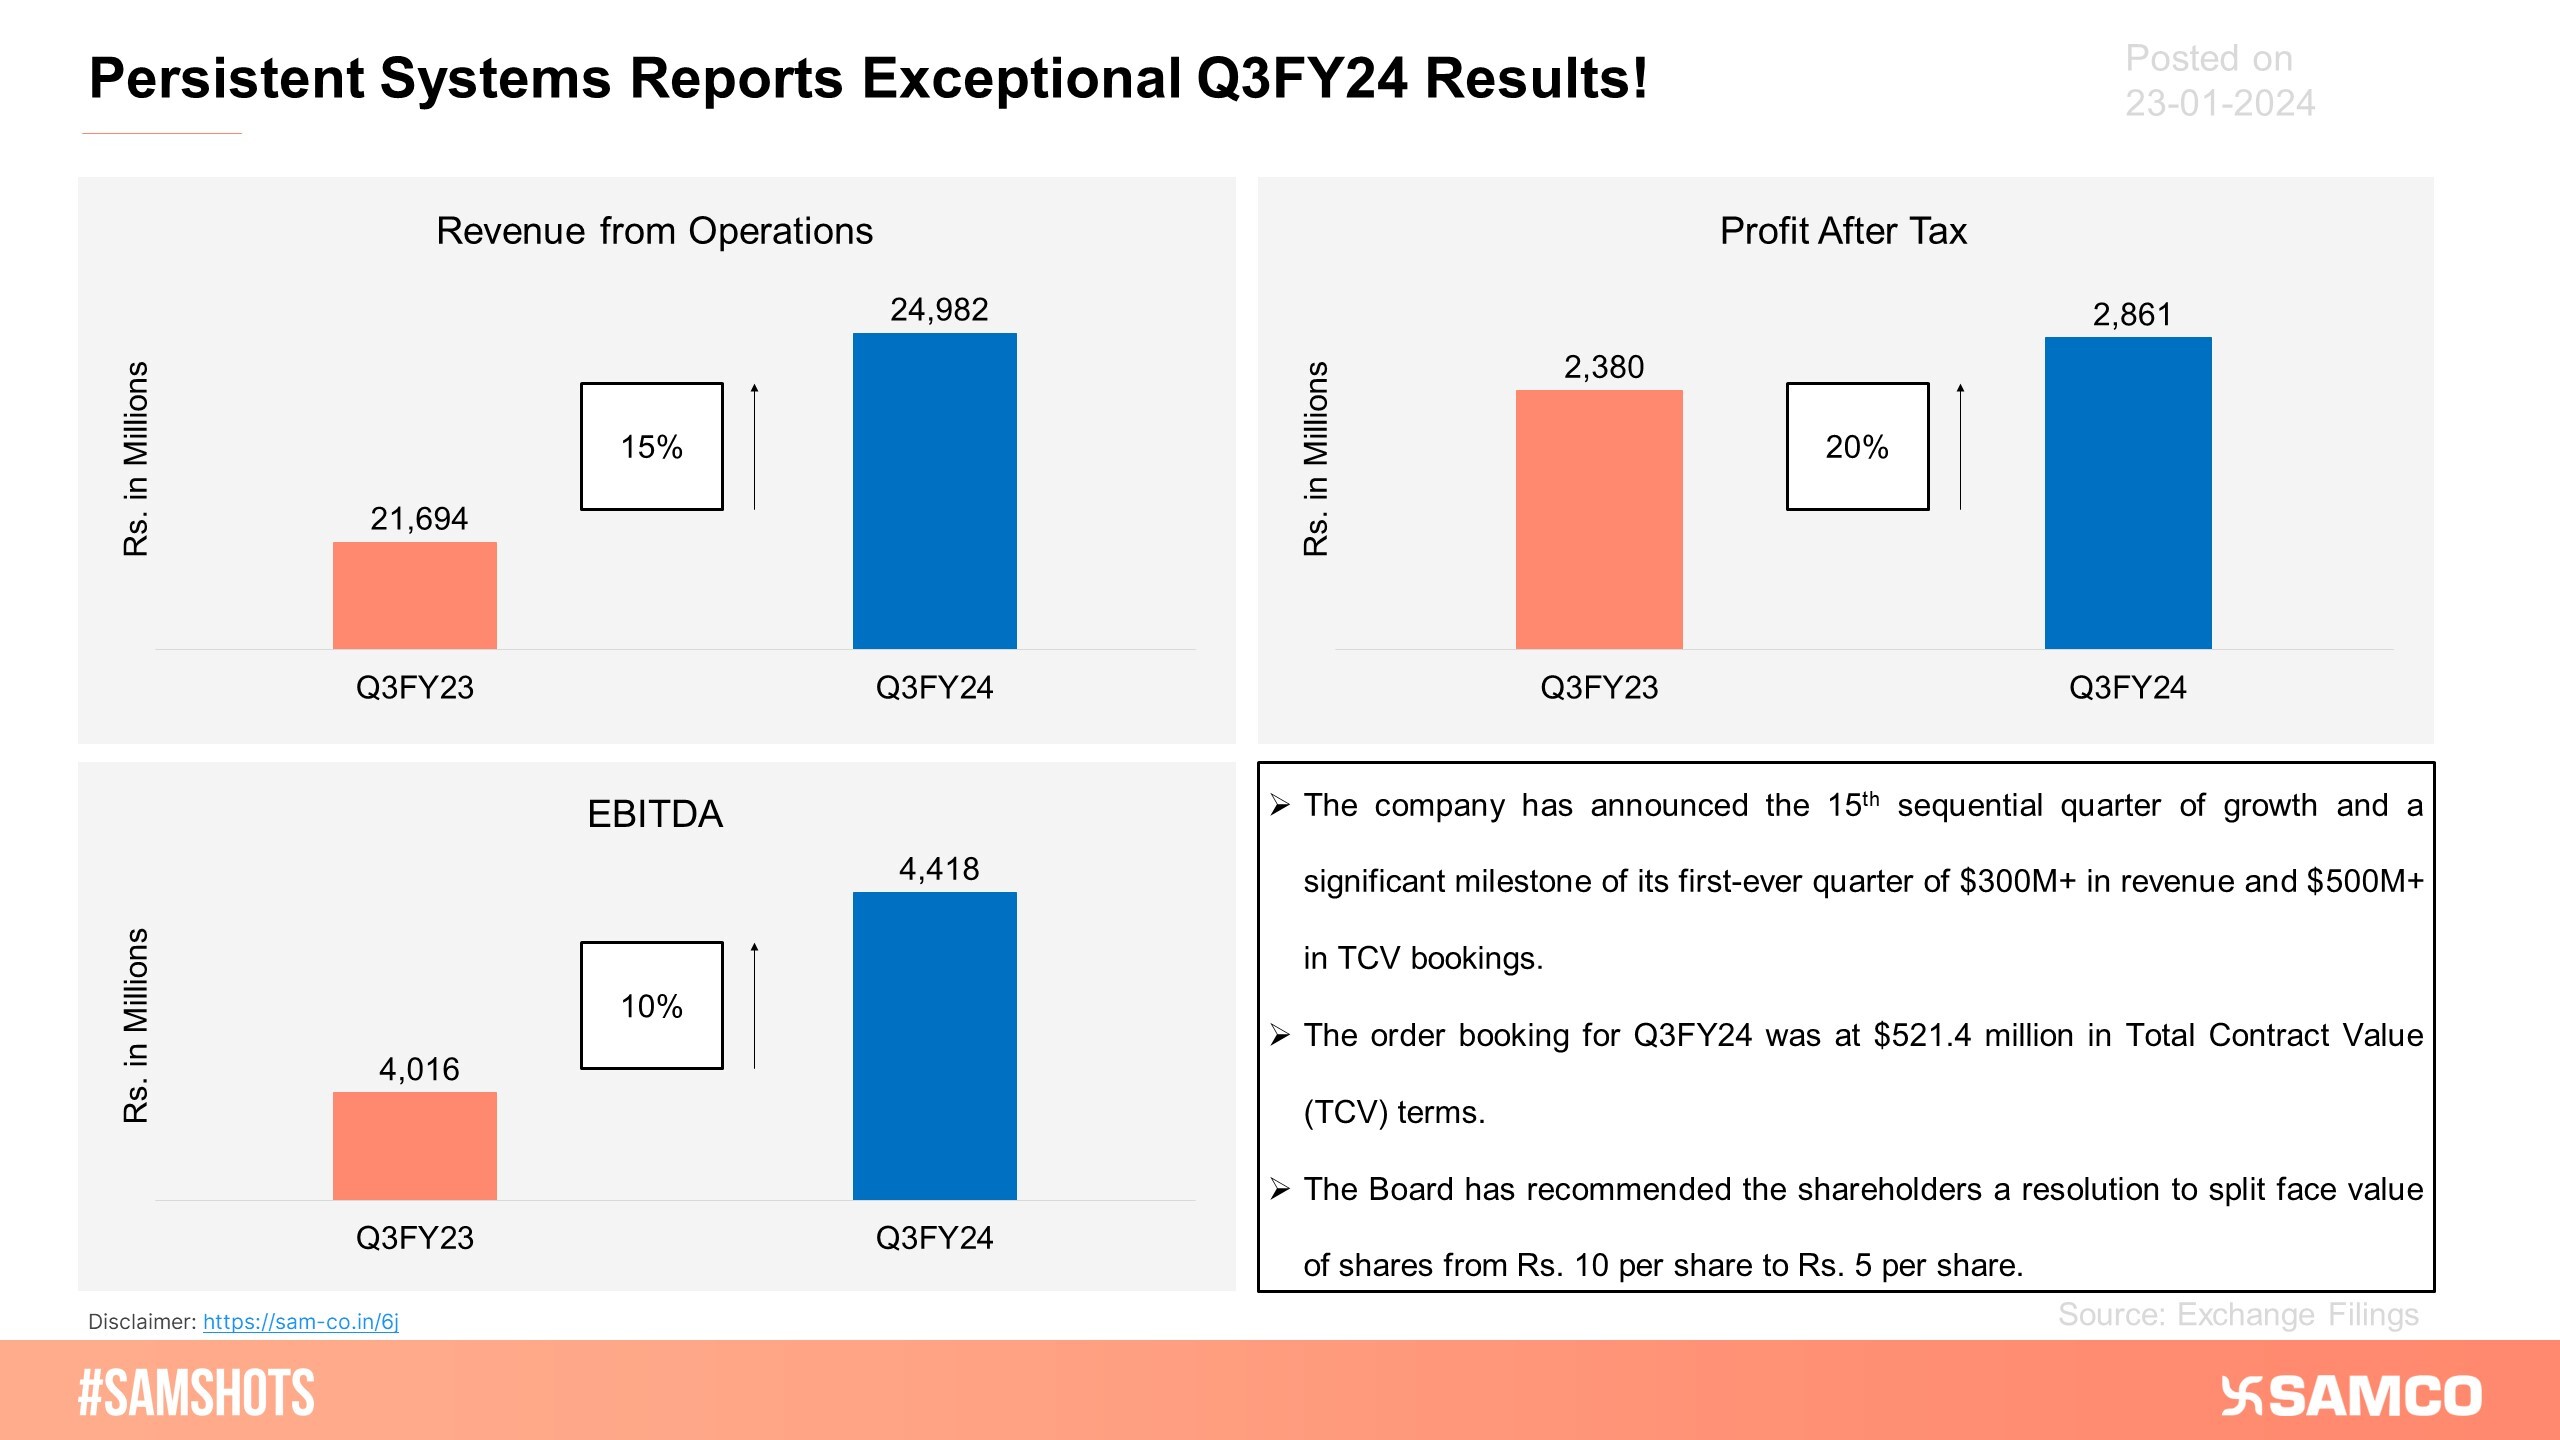 Here’s how Persistent Systems performed during Q3FY24!